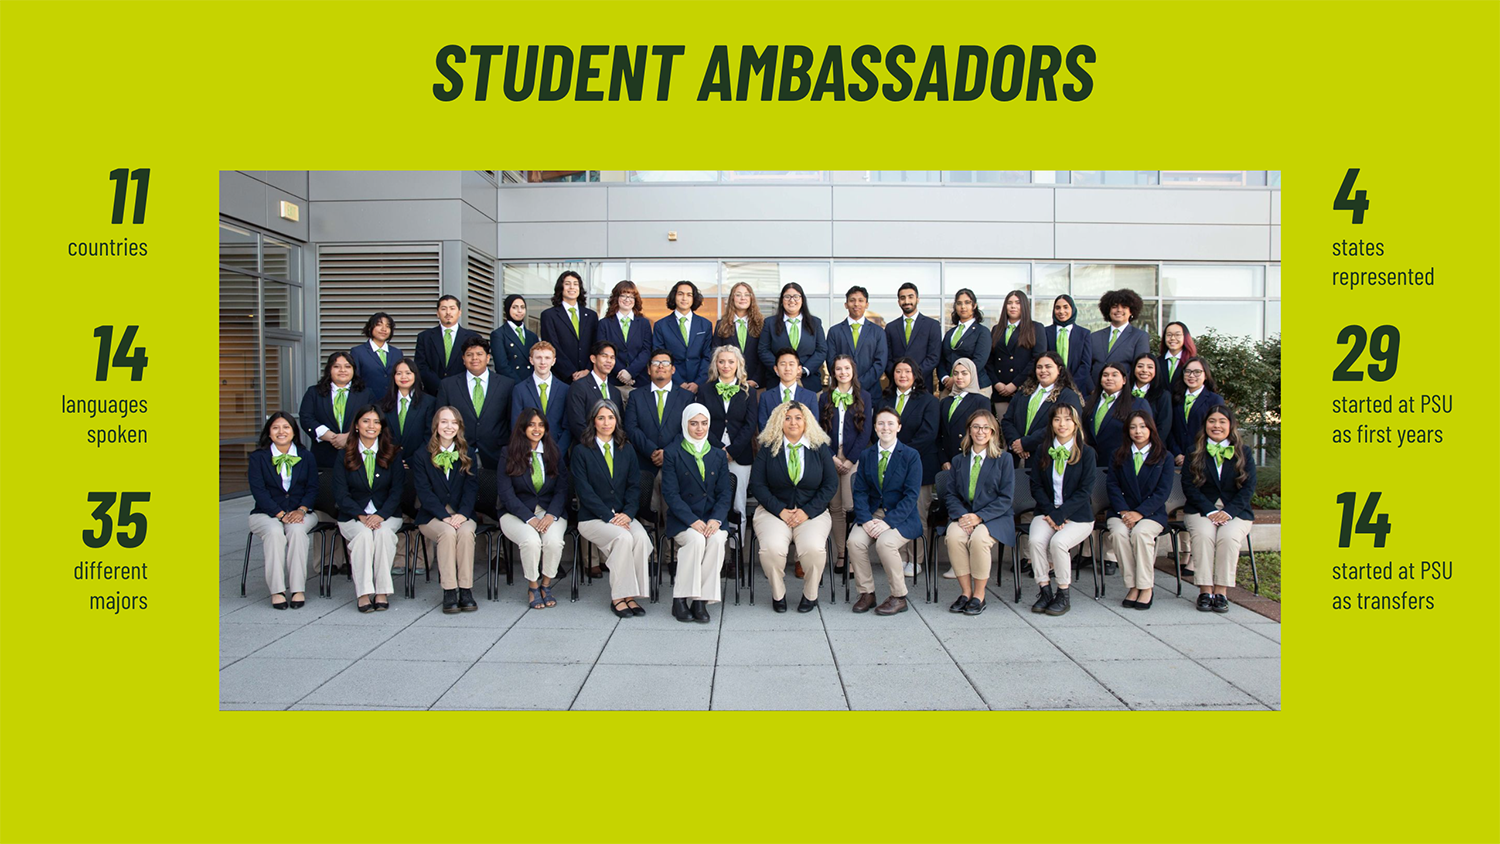 Image of student ambassadors with text: Student Ambassadors. 11 countries. 14 languages spoken. 35 different majors. 4 states represented. 29 started at PSU as first years. 14 started at PSU as transfers.